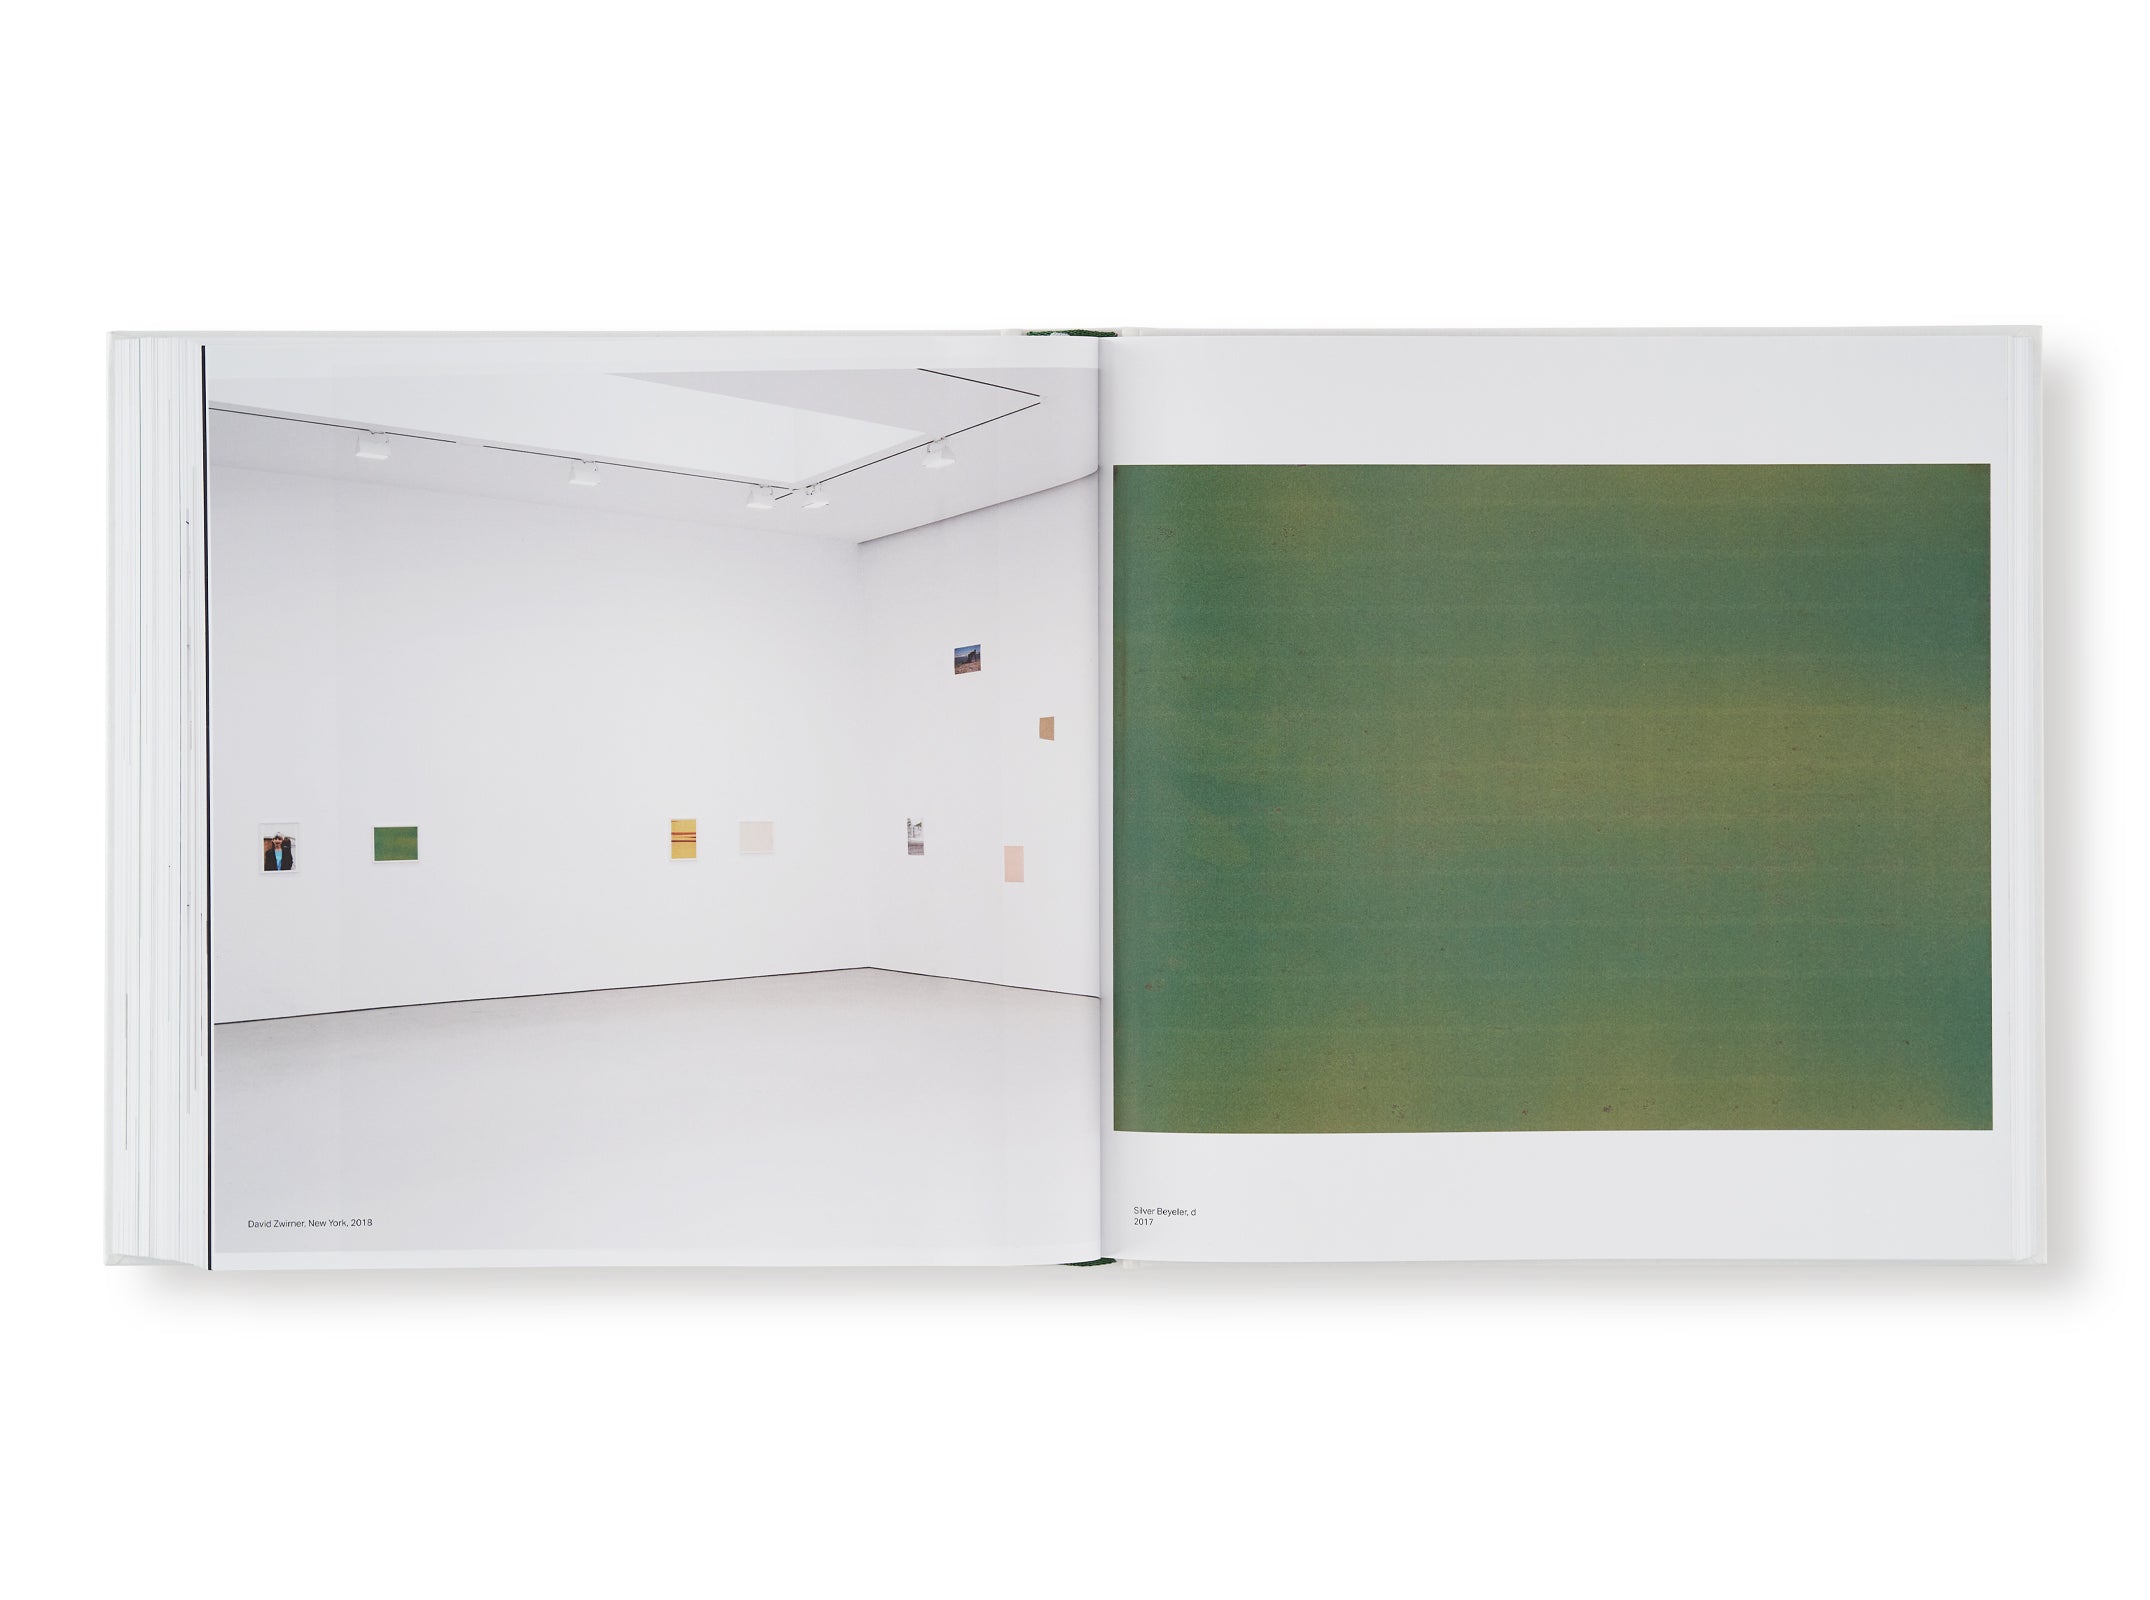 SATURATED LIGHT by Wolfgang Tillmans